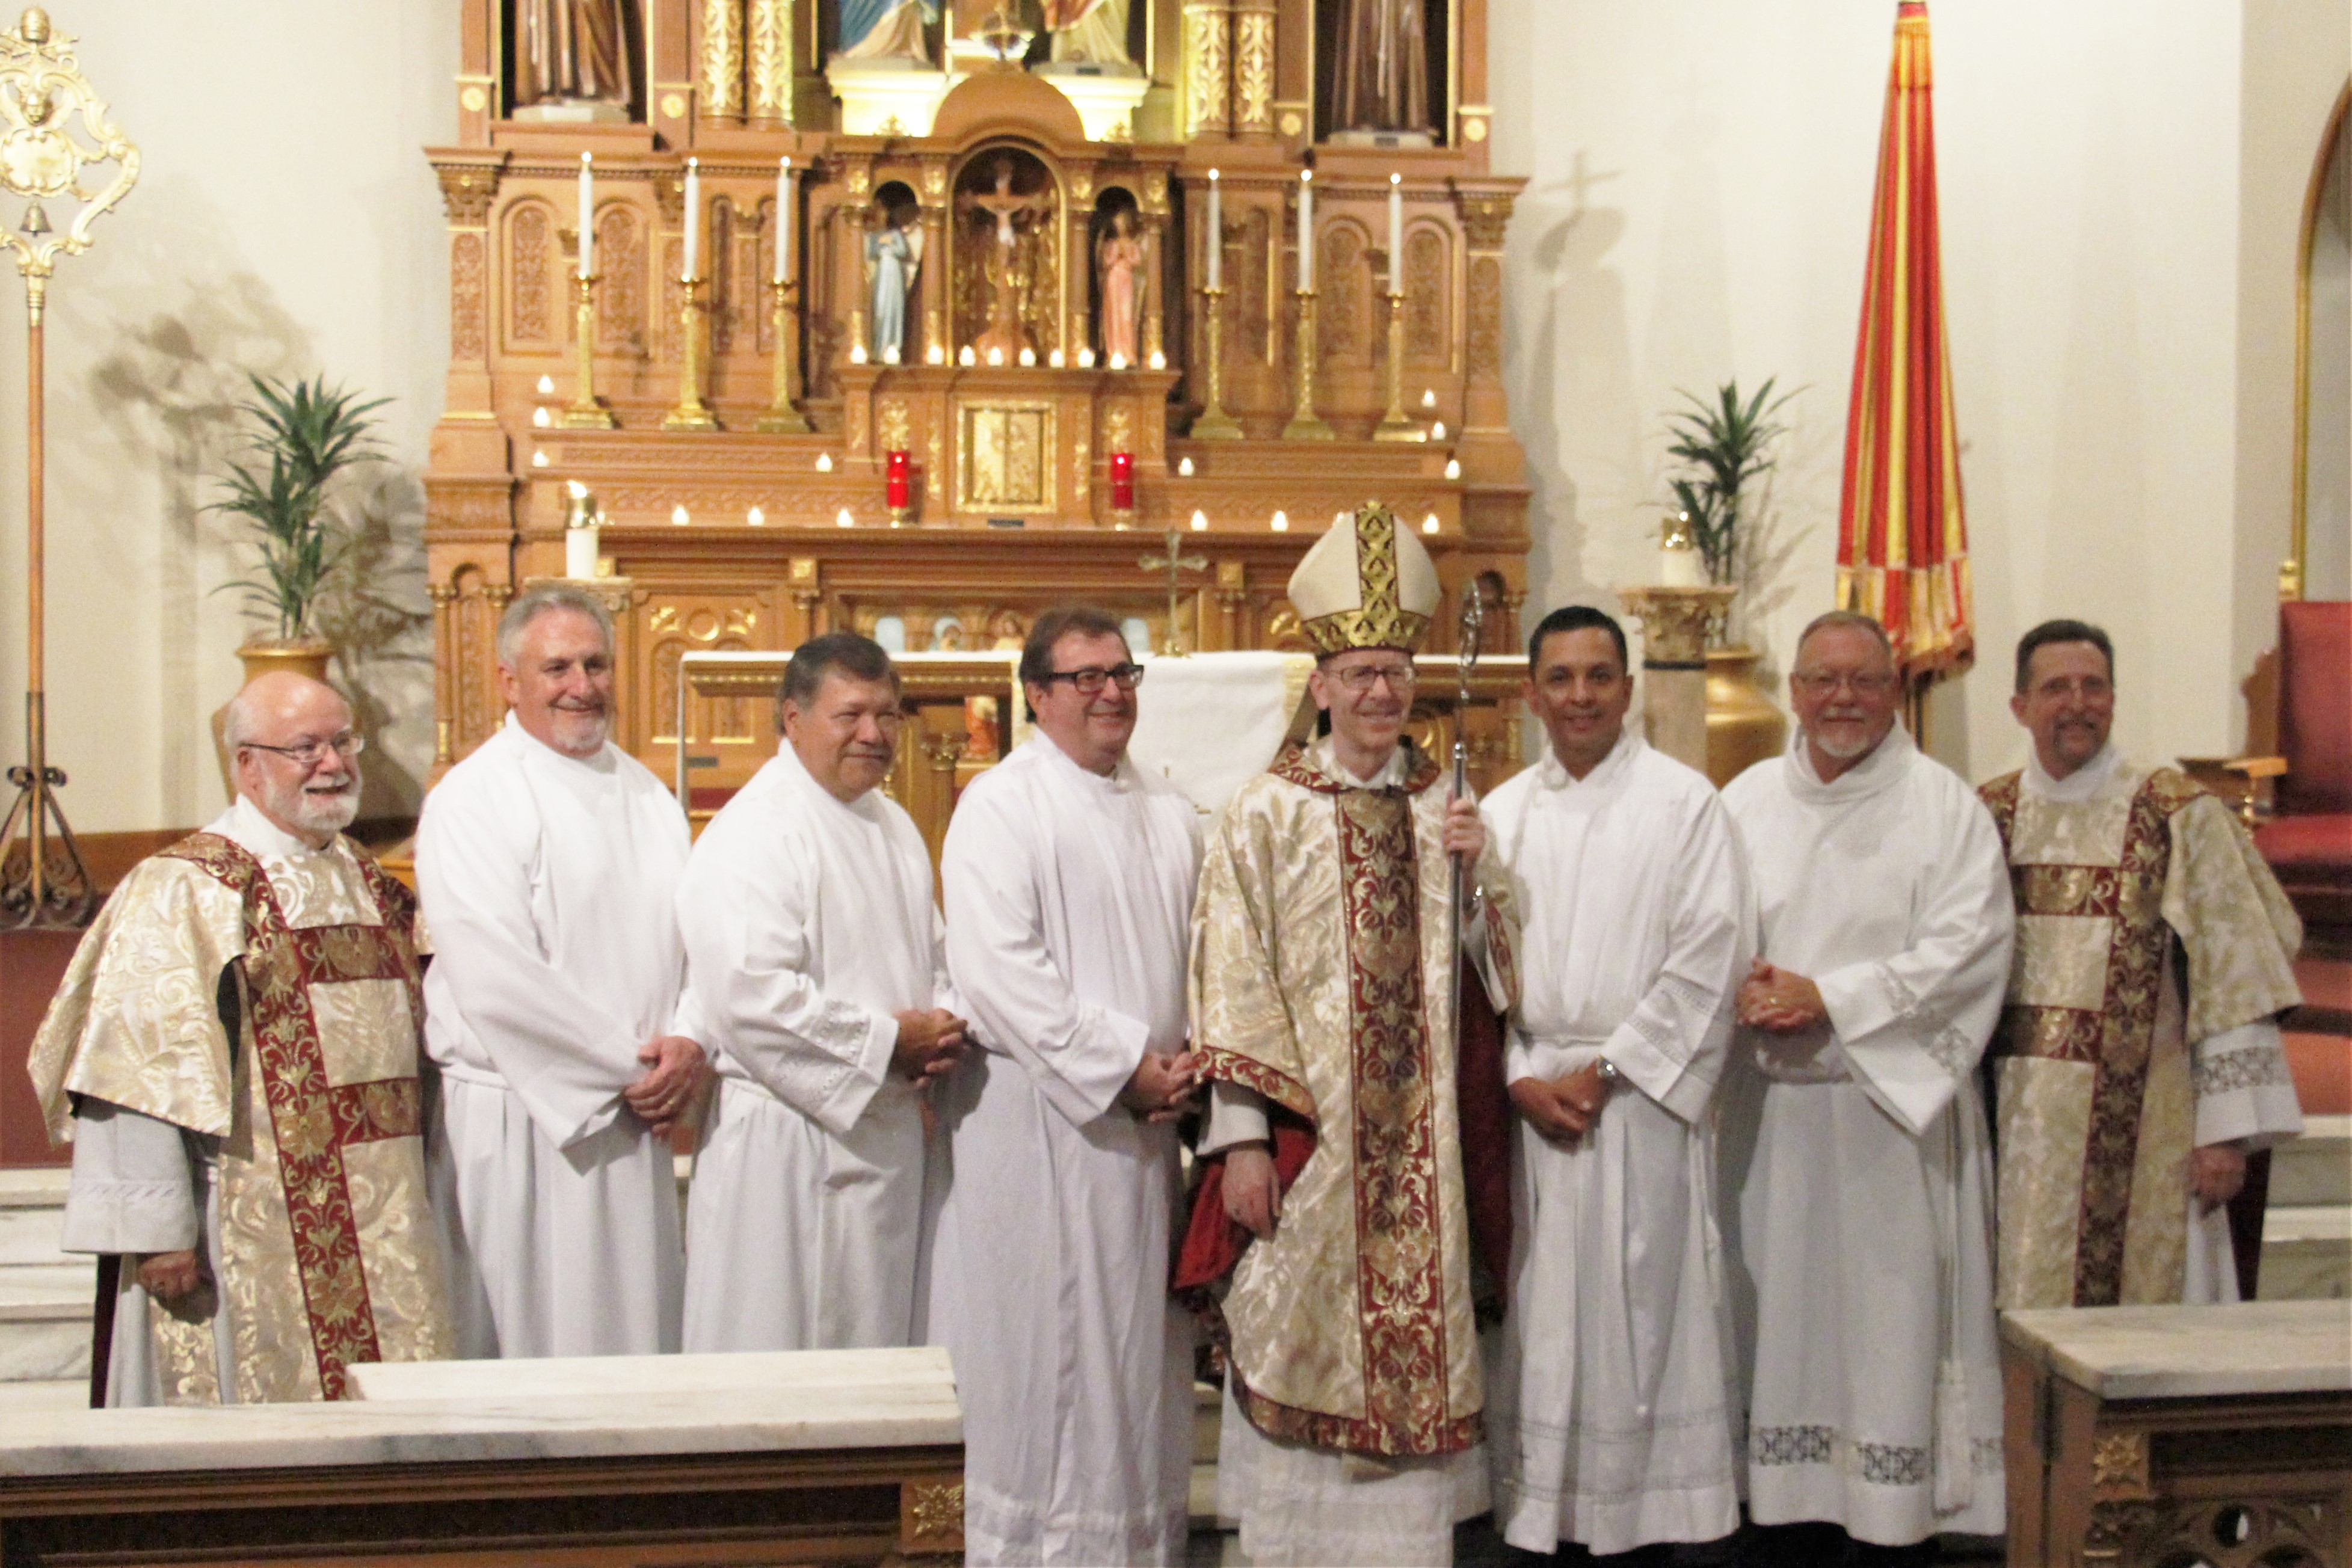 Bishop Thomas J. Olmsted will ordain five men to the permanent diaconate Nov. 5. The five men are pictured with Bishop Olmsted (center), director of the diocesan Office of the Permanent Diaconate Dcn. Jim Trant (far left) and associate director Dcn. Doug Bogart (far right) shortly after they were instituted to as acolytes on Aug. 28, 2015 at Ss. Simon and Jude Cathedral. The candidates are, from left to right: Anthony Smith, Marvin Silva, Gary Scott, William Chavira and Chris Giannola. (Photo courtesy of the Office of the Permanent Diaconate)